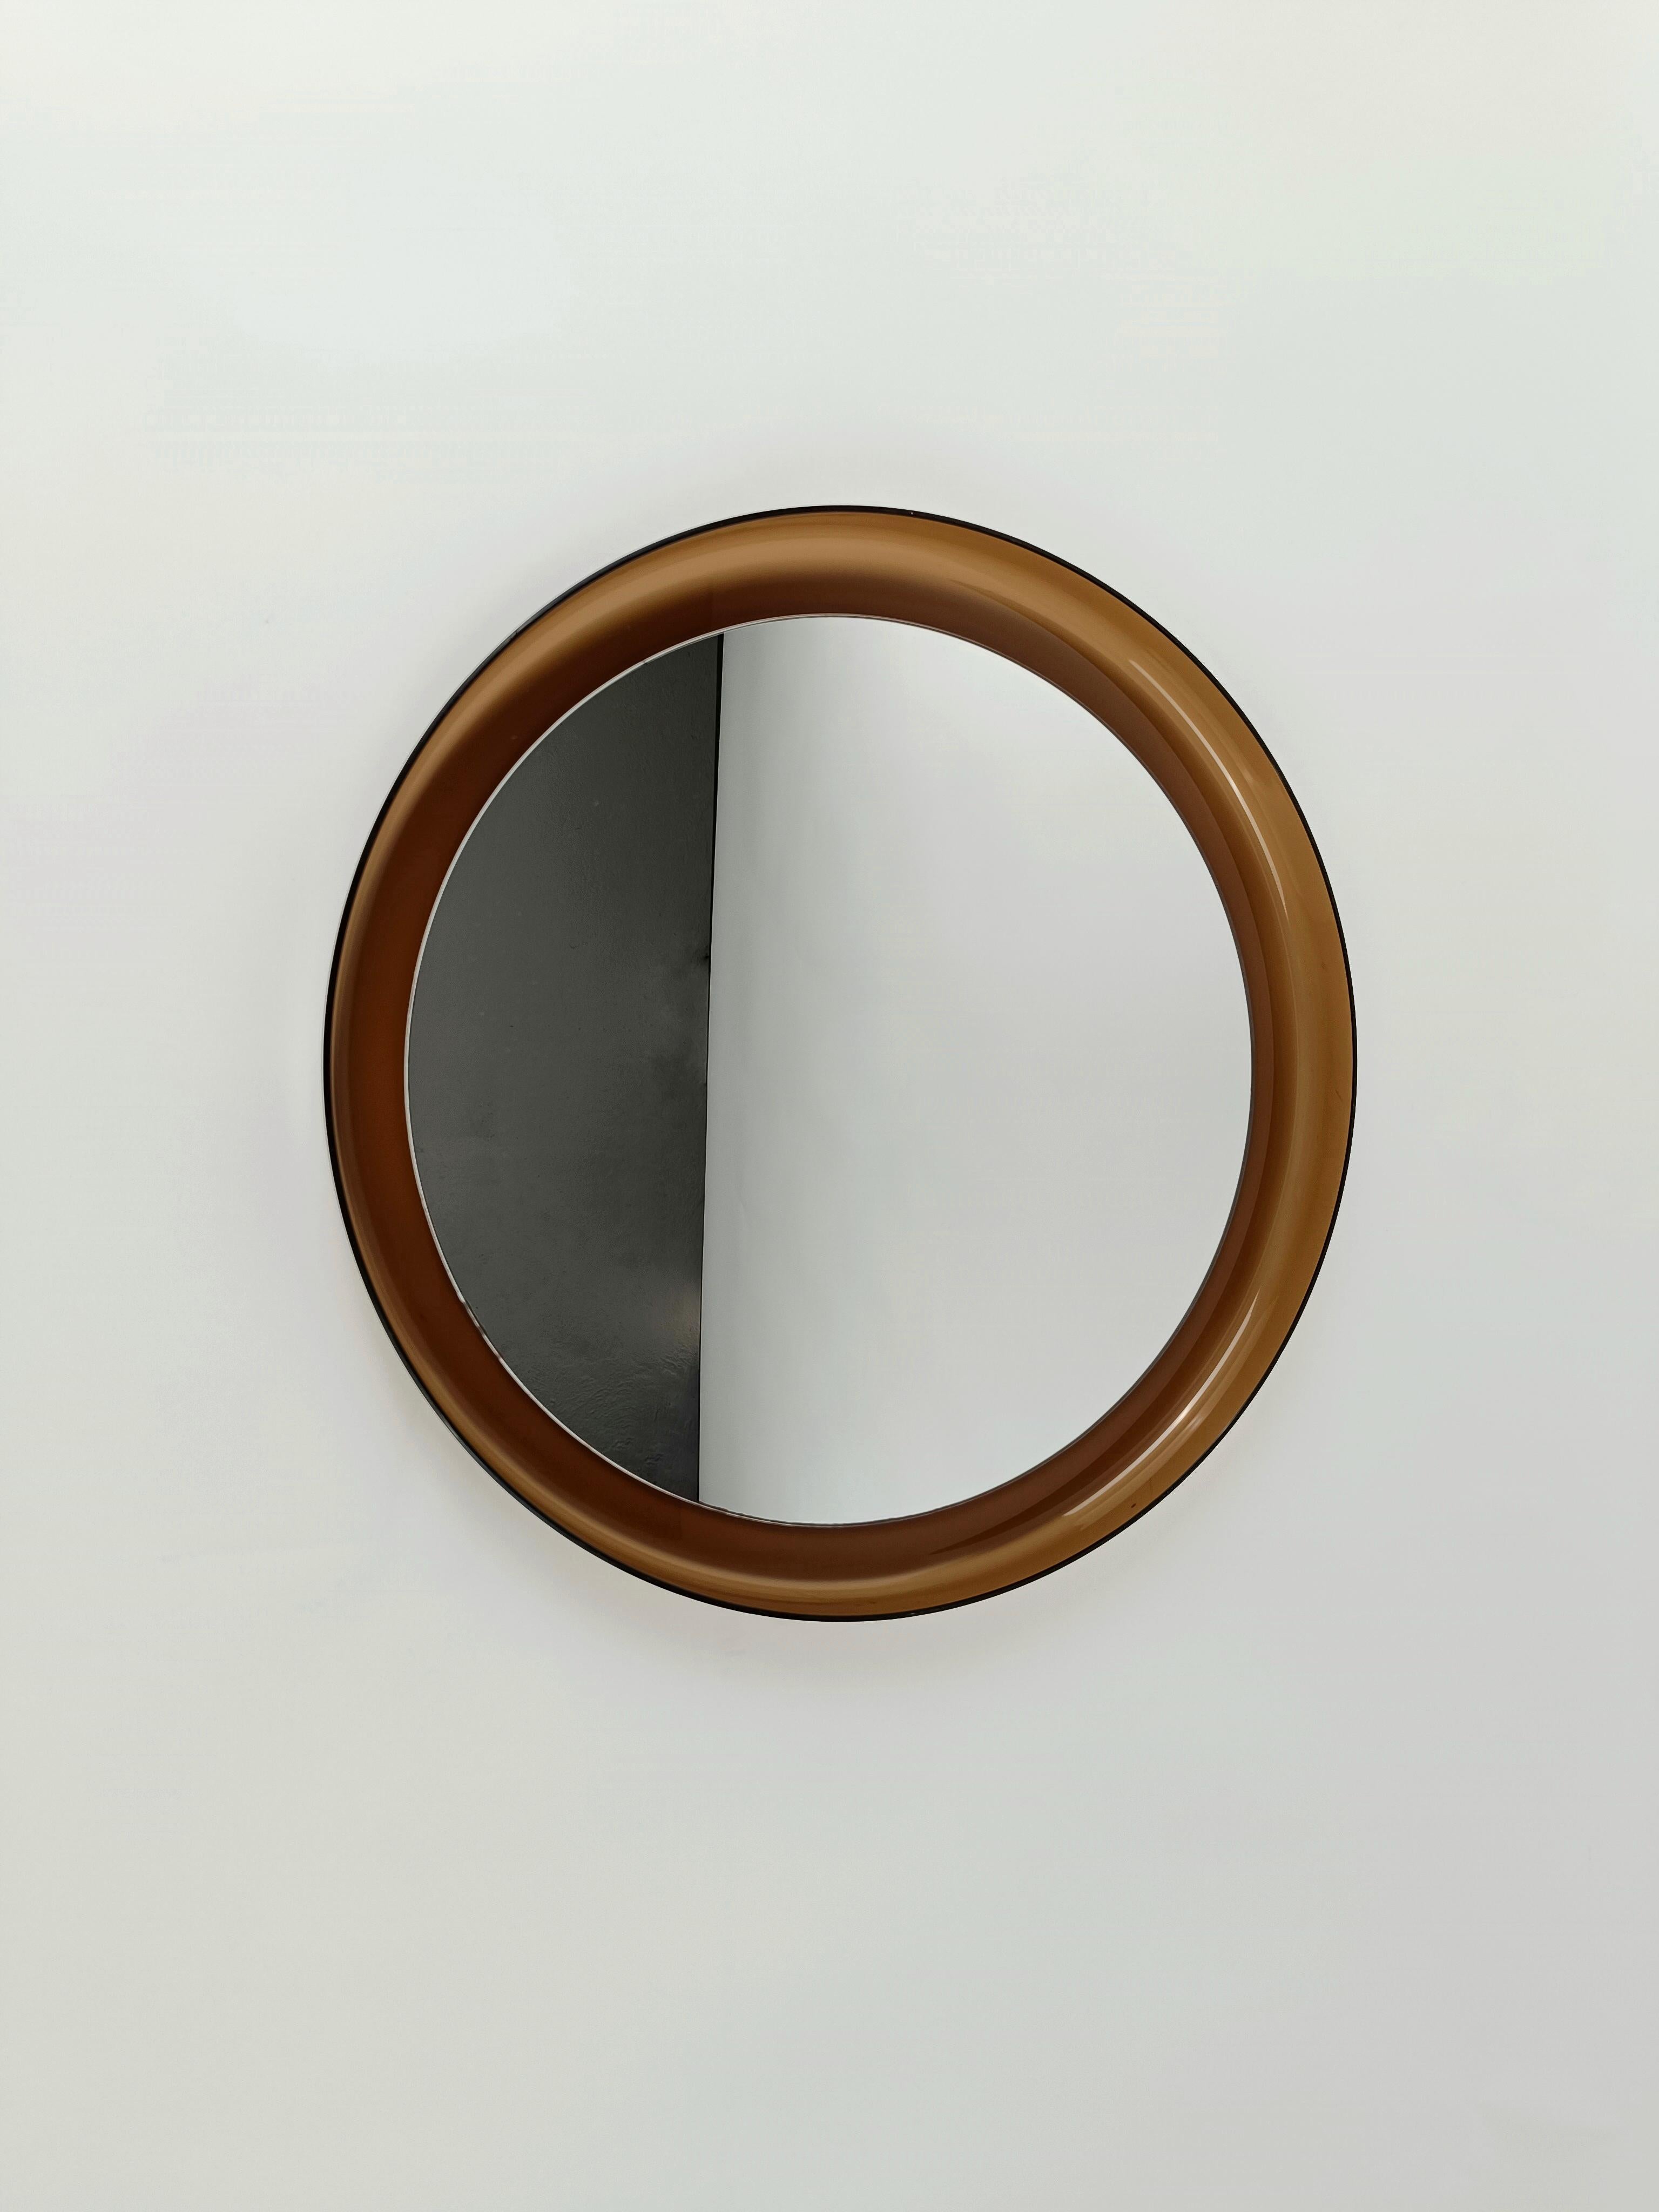 An Italian Space Age Round Mirror in Smoked Lucite by Guzzini 1960s  For Sale 3